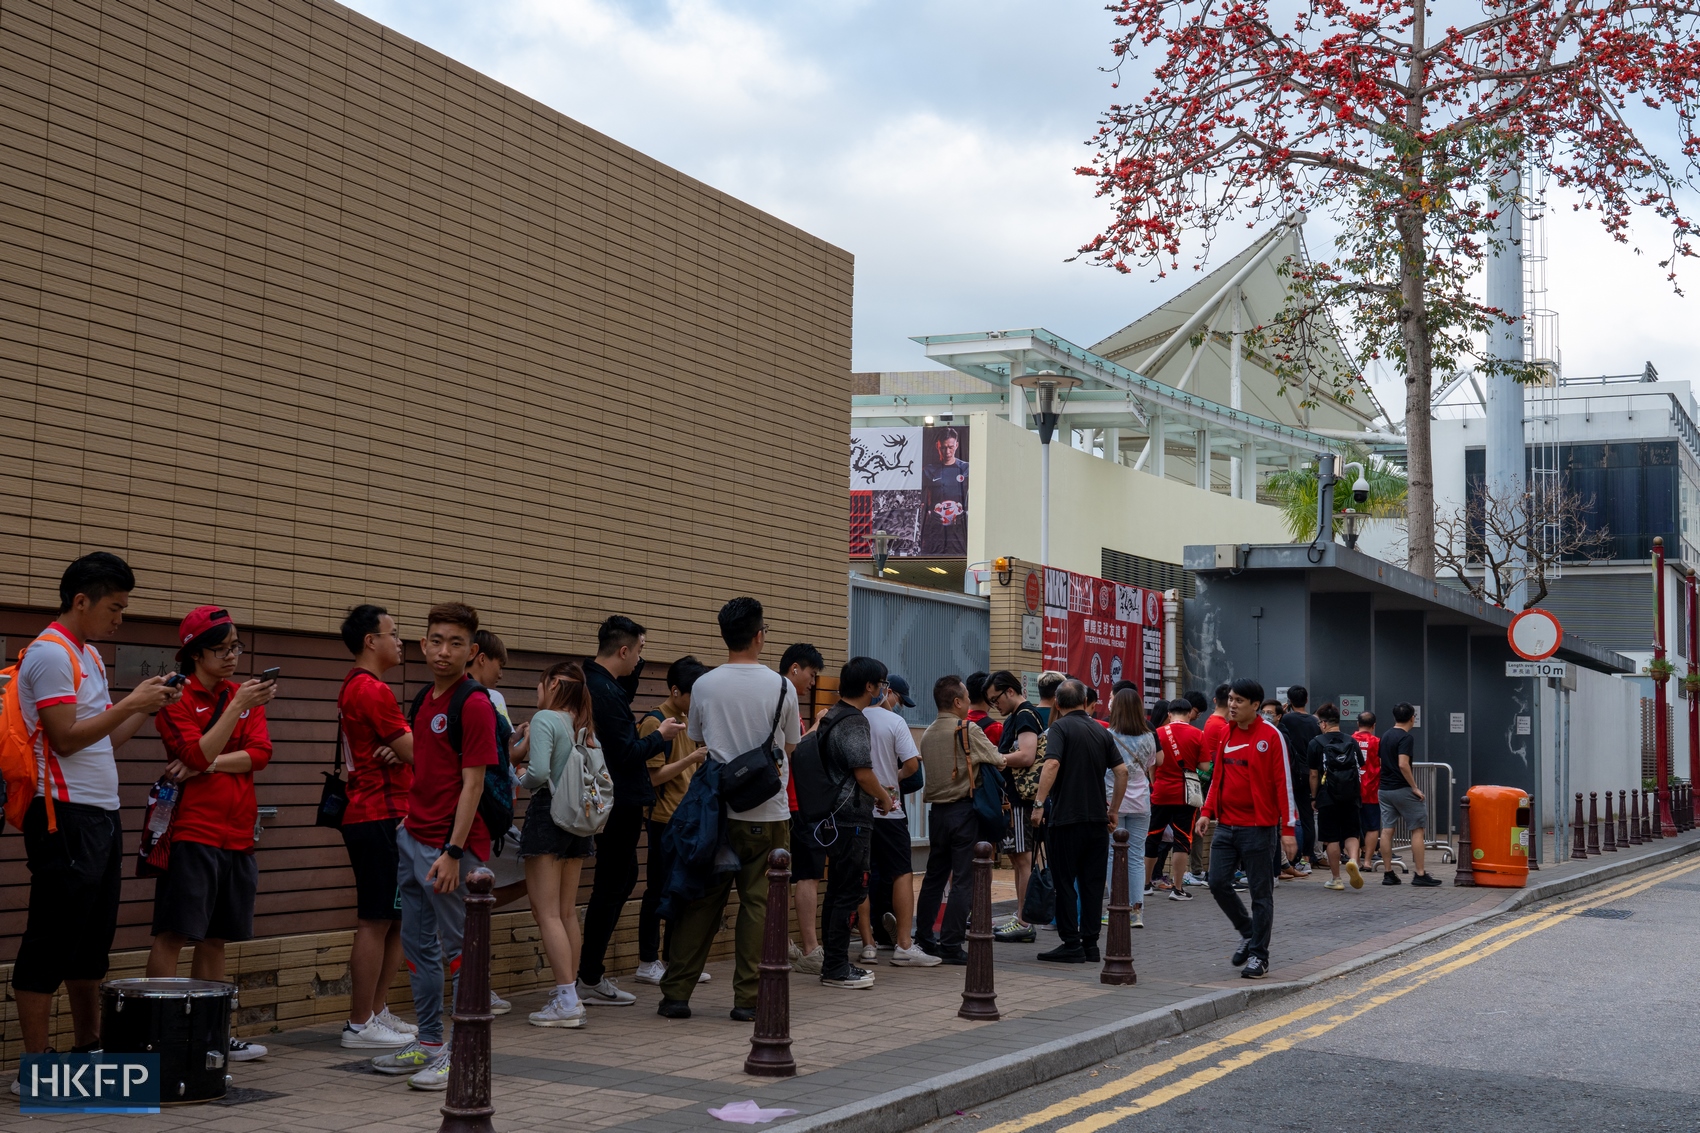 Fans queuing outside the Mong Kok Stadium for an international friendly football match between Hong Kong and Singapore on March 23, 2023.